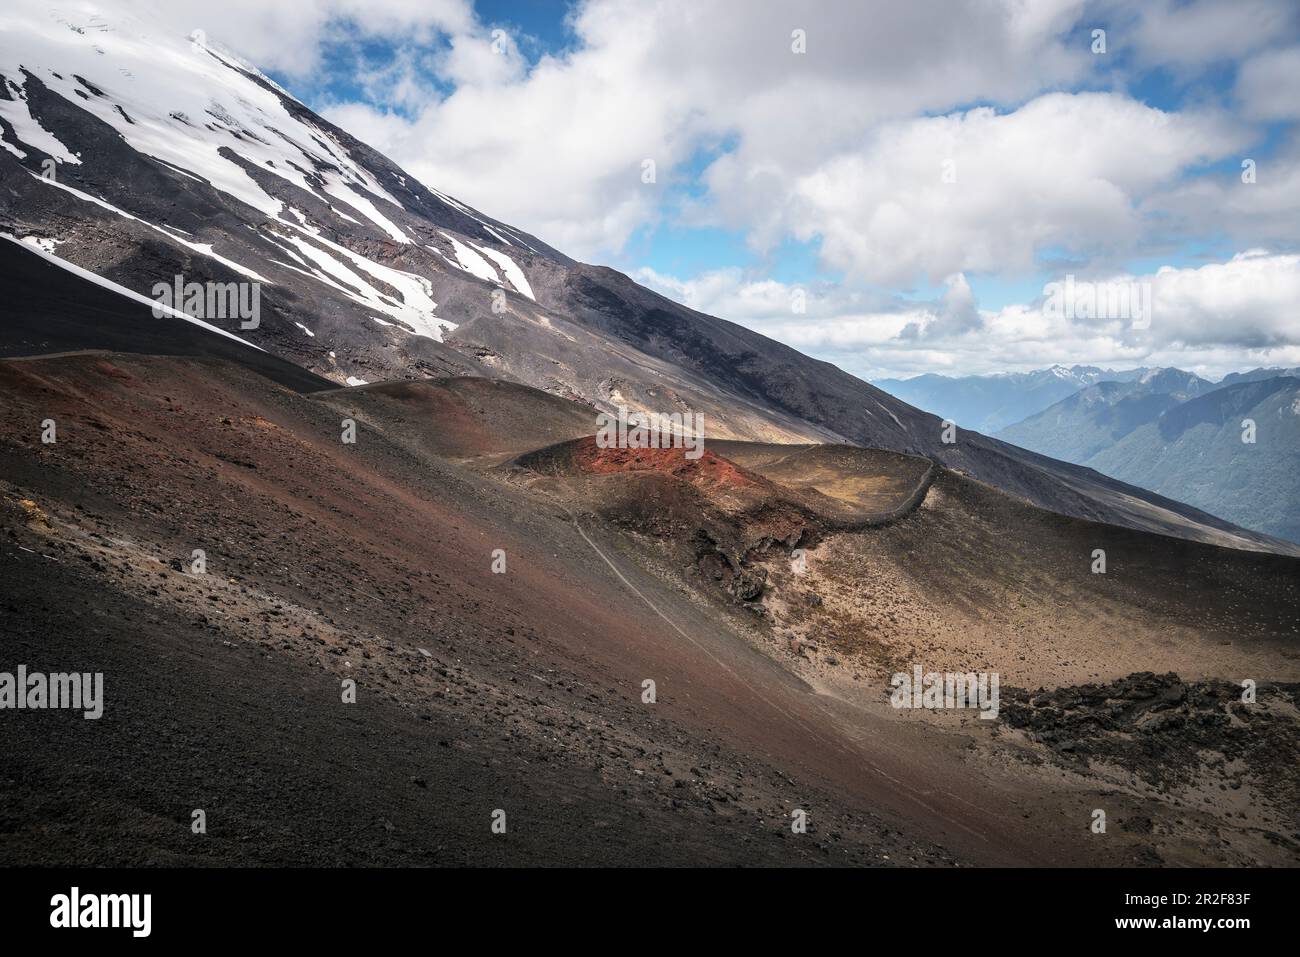 Detail of the volcanic landscape on the Osorno, Region de los Lagos, Chile, South America Stock Photo